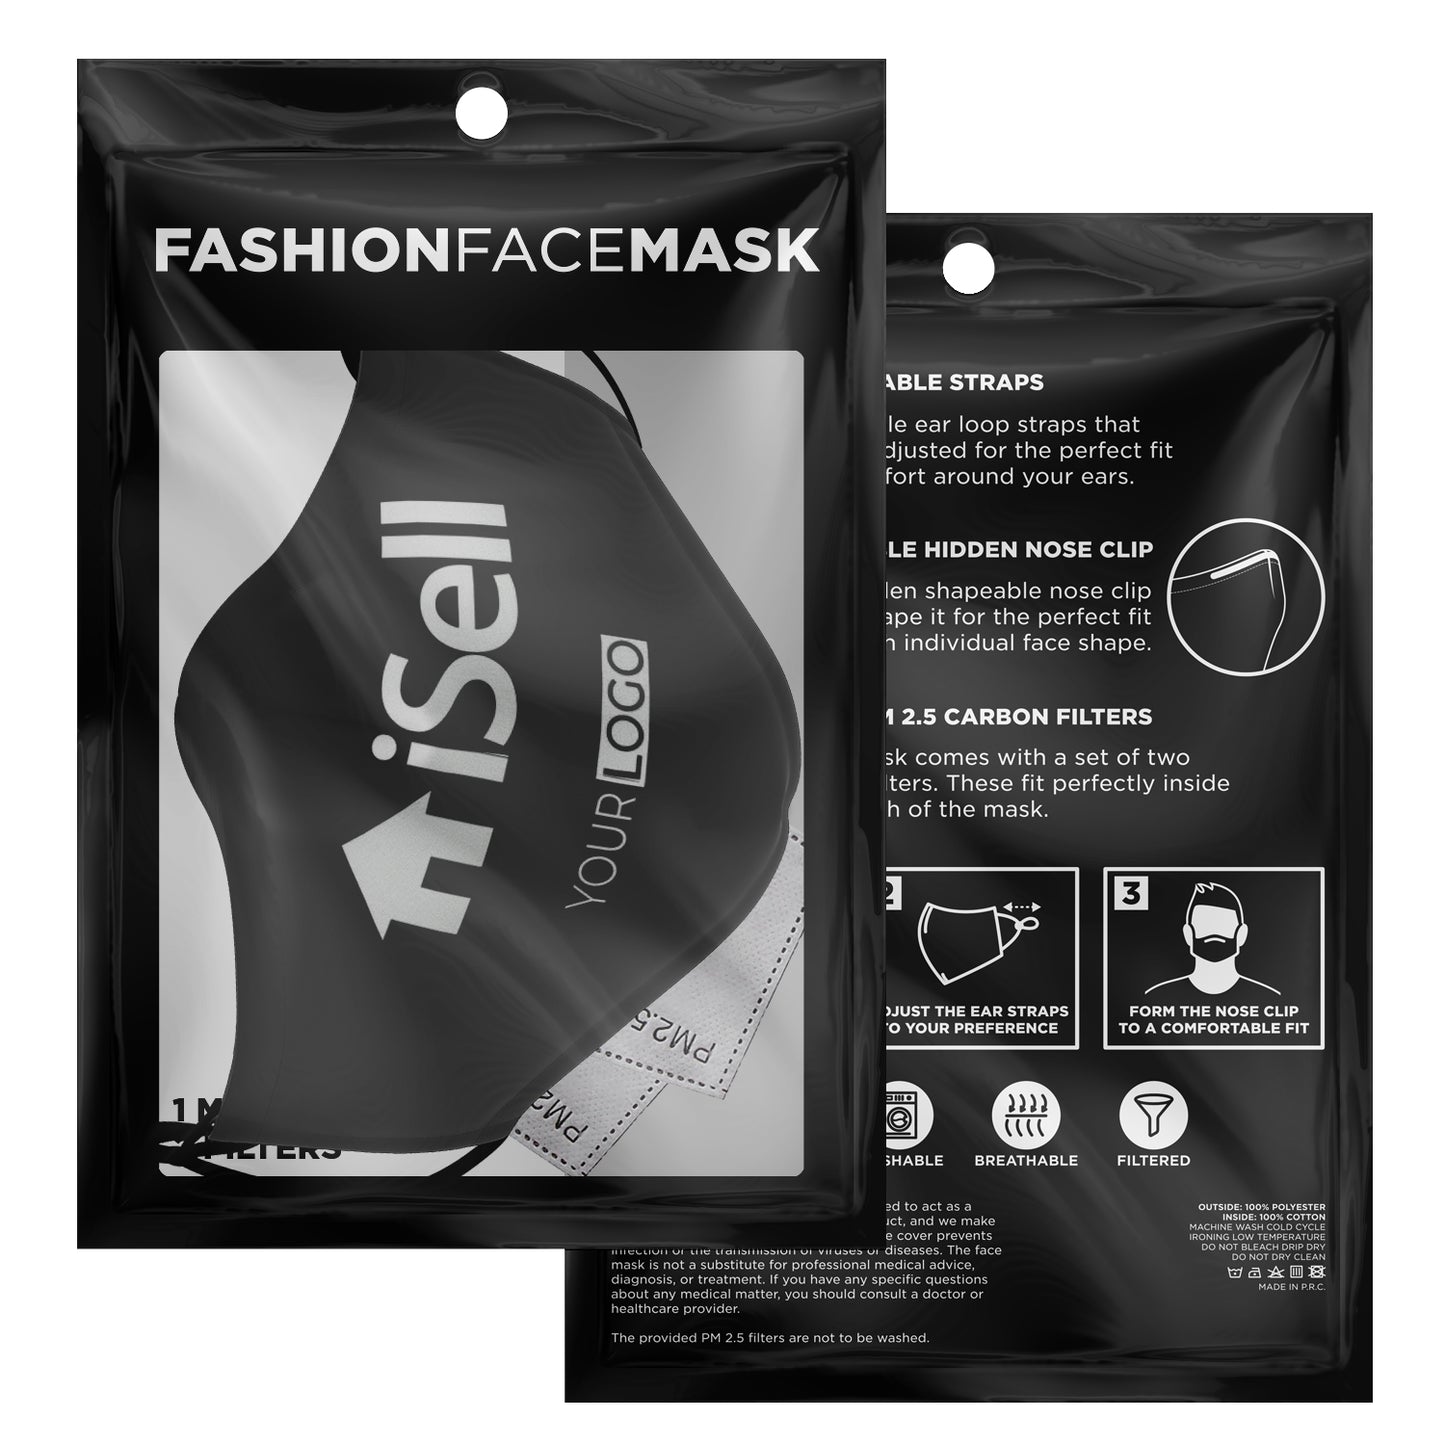 iSell Realtor Face Mask